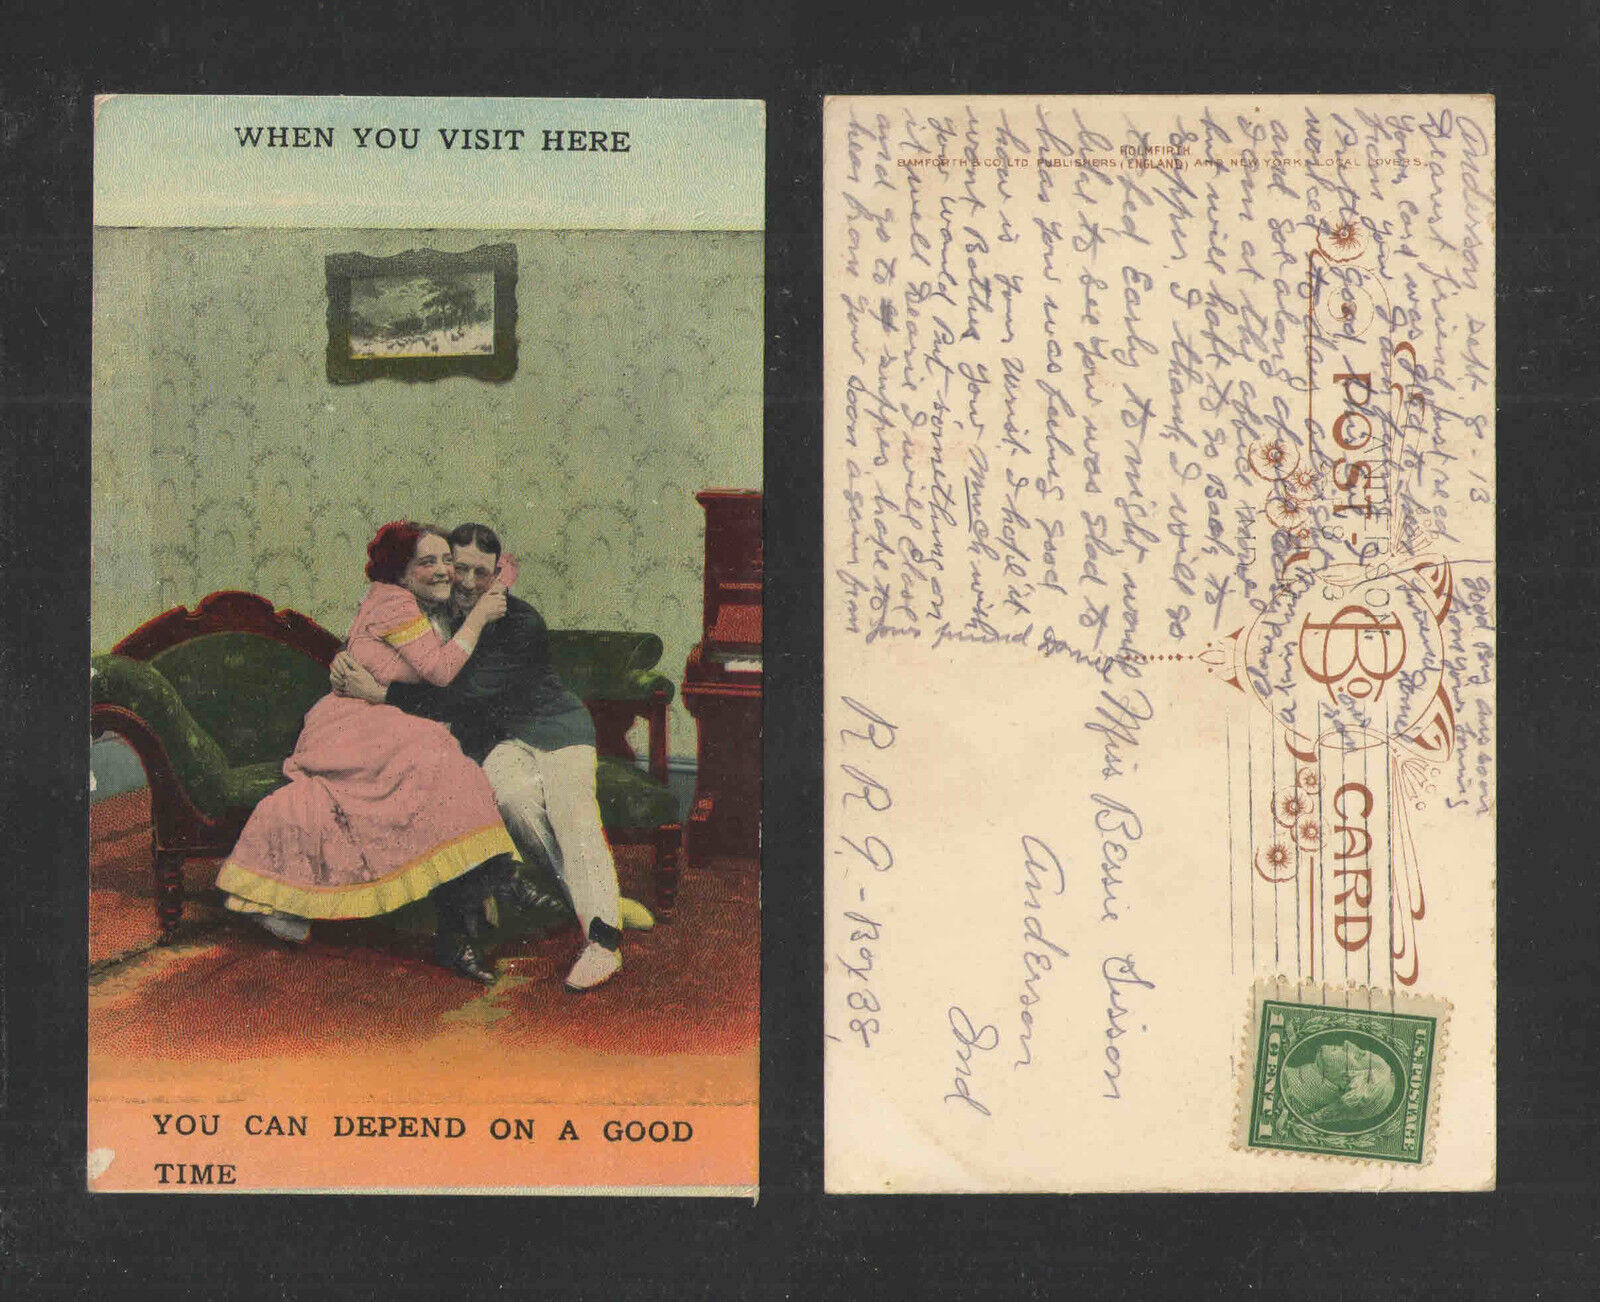 1913 WHEN U VISIT HERE U CAN DEPEND ON GOOD TIME LOCAL LOVERS ROMANTIC POSTCARD